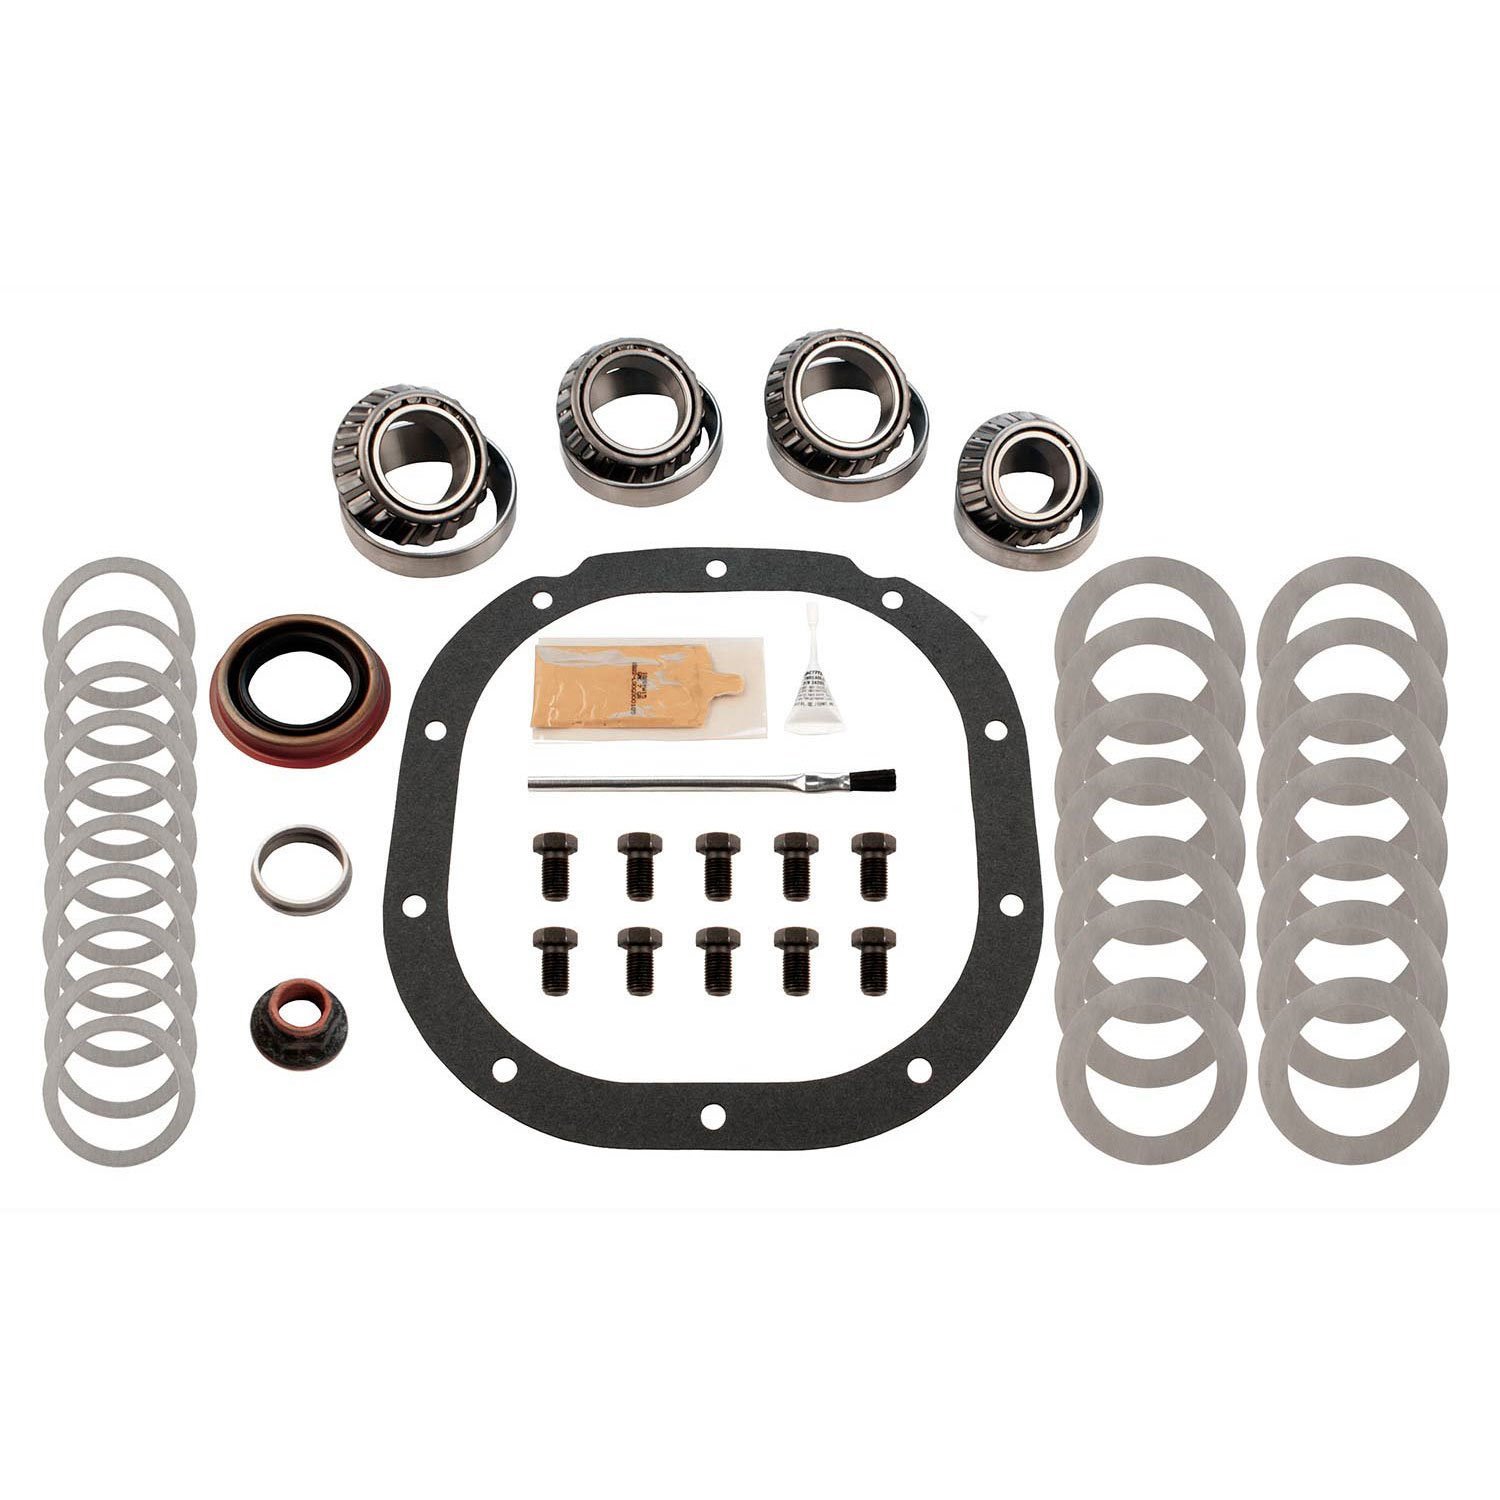 Master Installation Kit Ford 8.8" Includes: